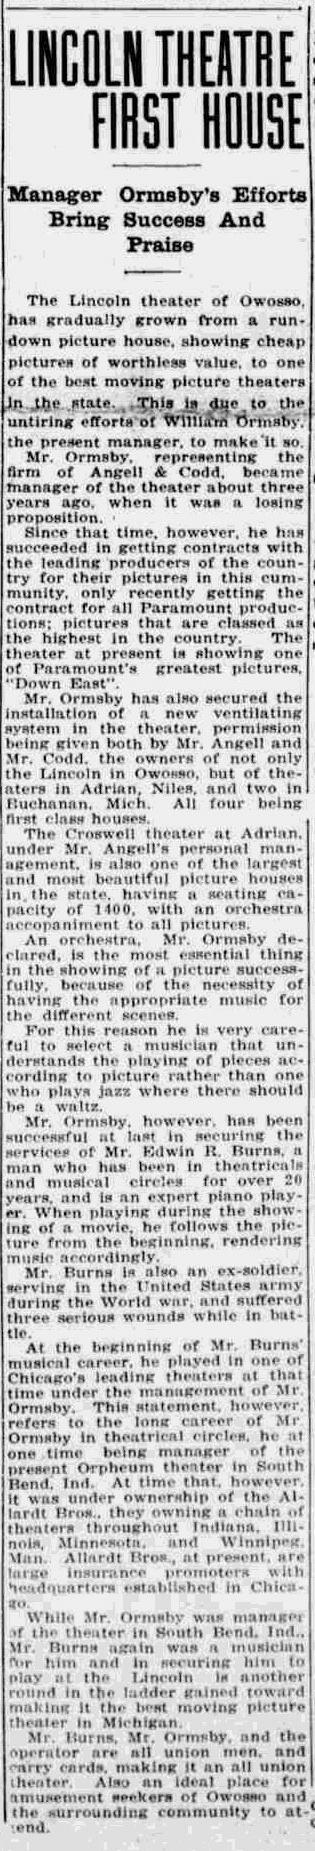 Lincoln Theater - May 12 1922 Article